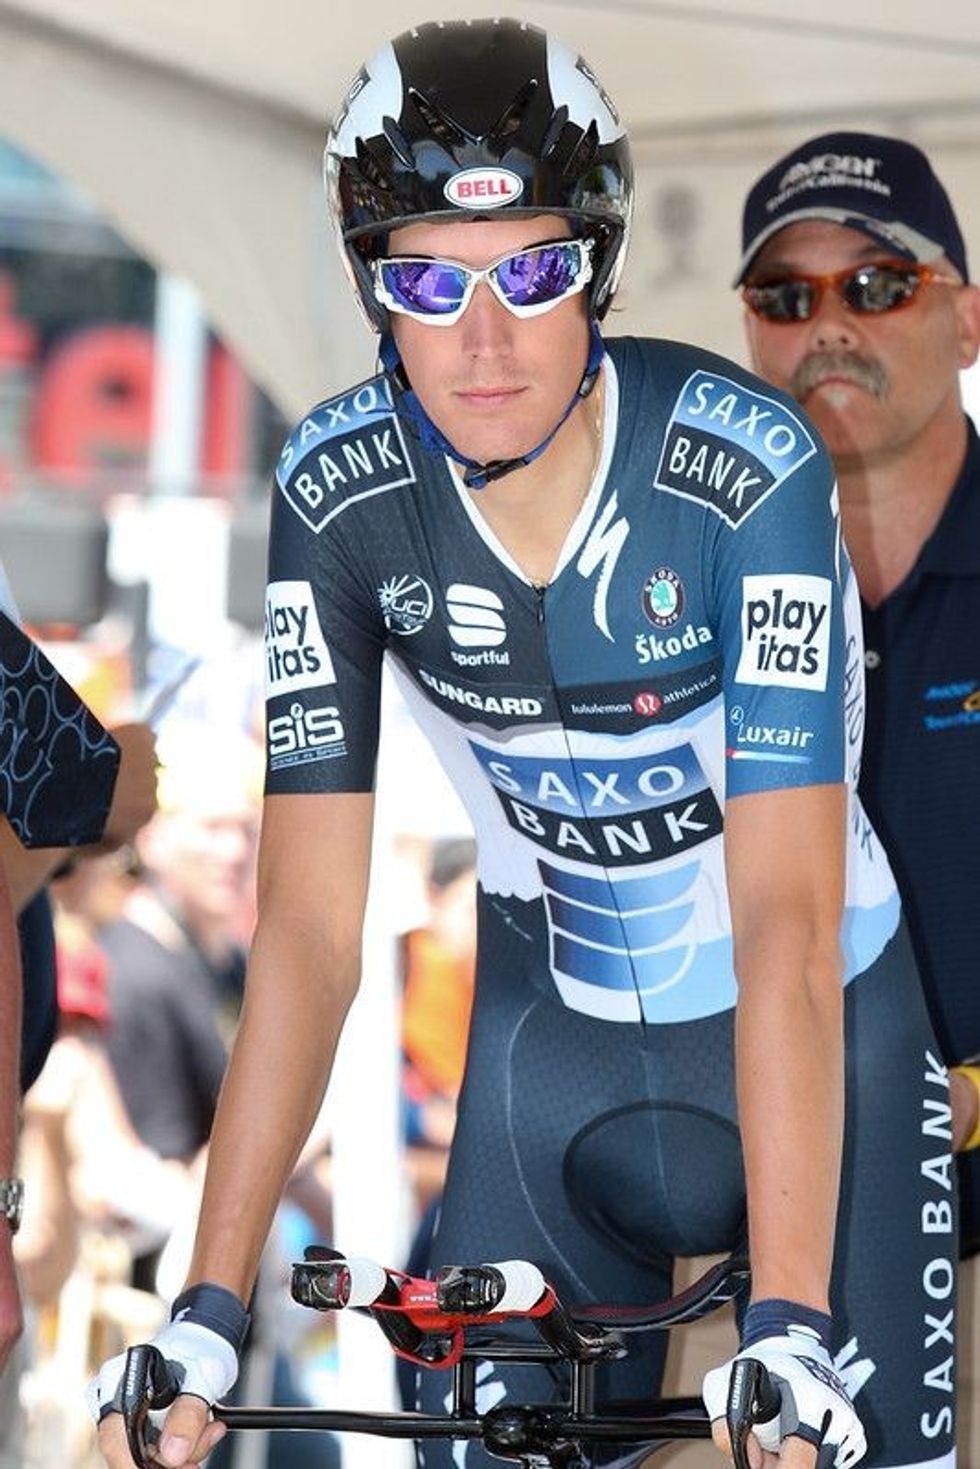 Andy Schleck is a third-generation cyclist, with both his dad Johny Schleck and grandfather having competed in professional cycling. Find out more details, including Andy Schleck's birthday, net worth, and much more.